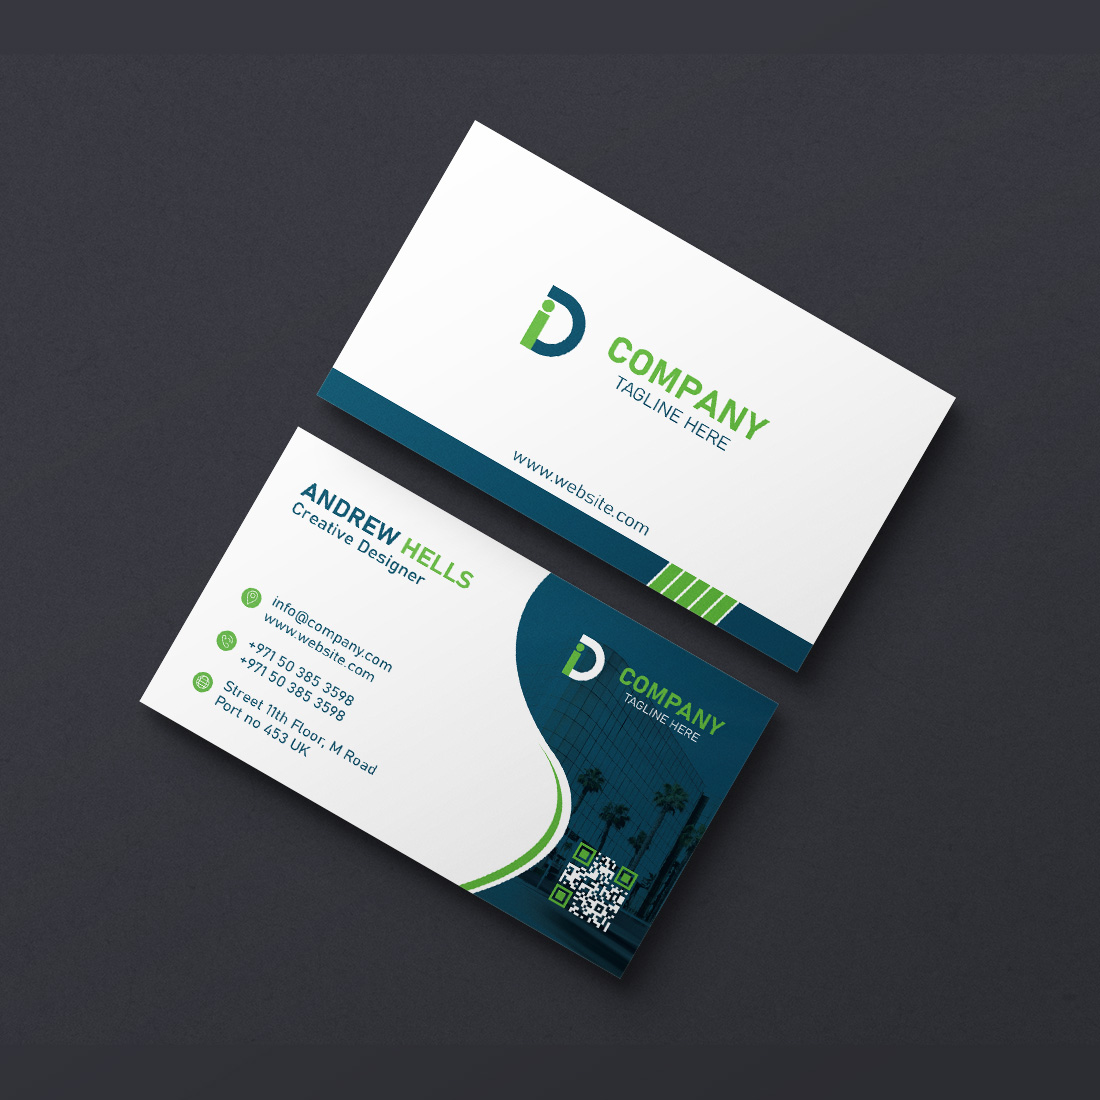 Business card with a green and white design.